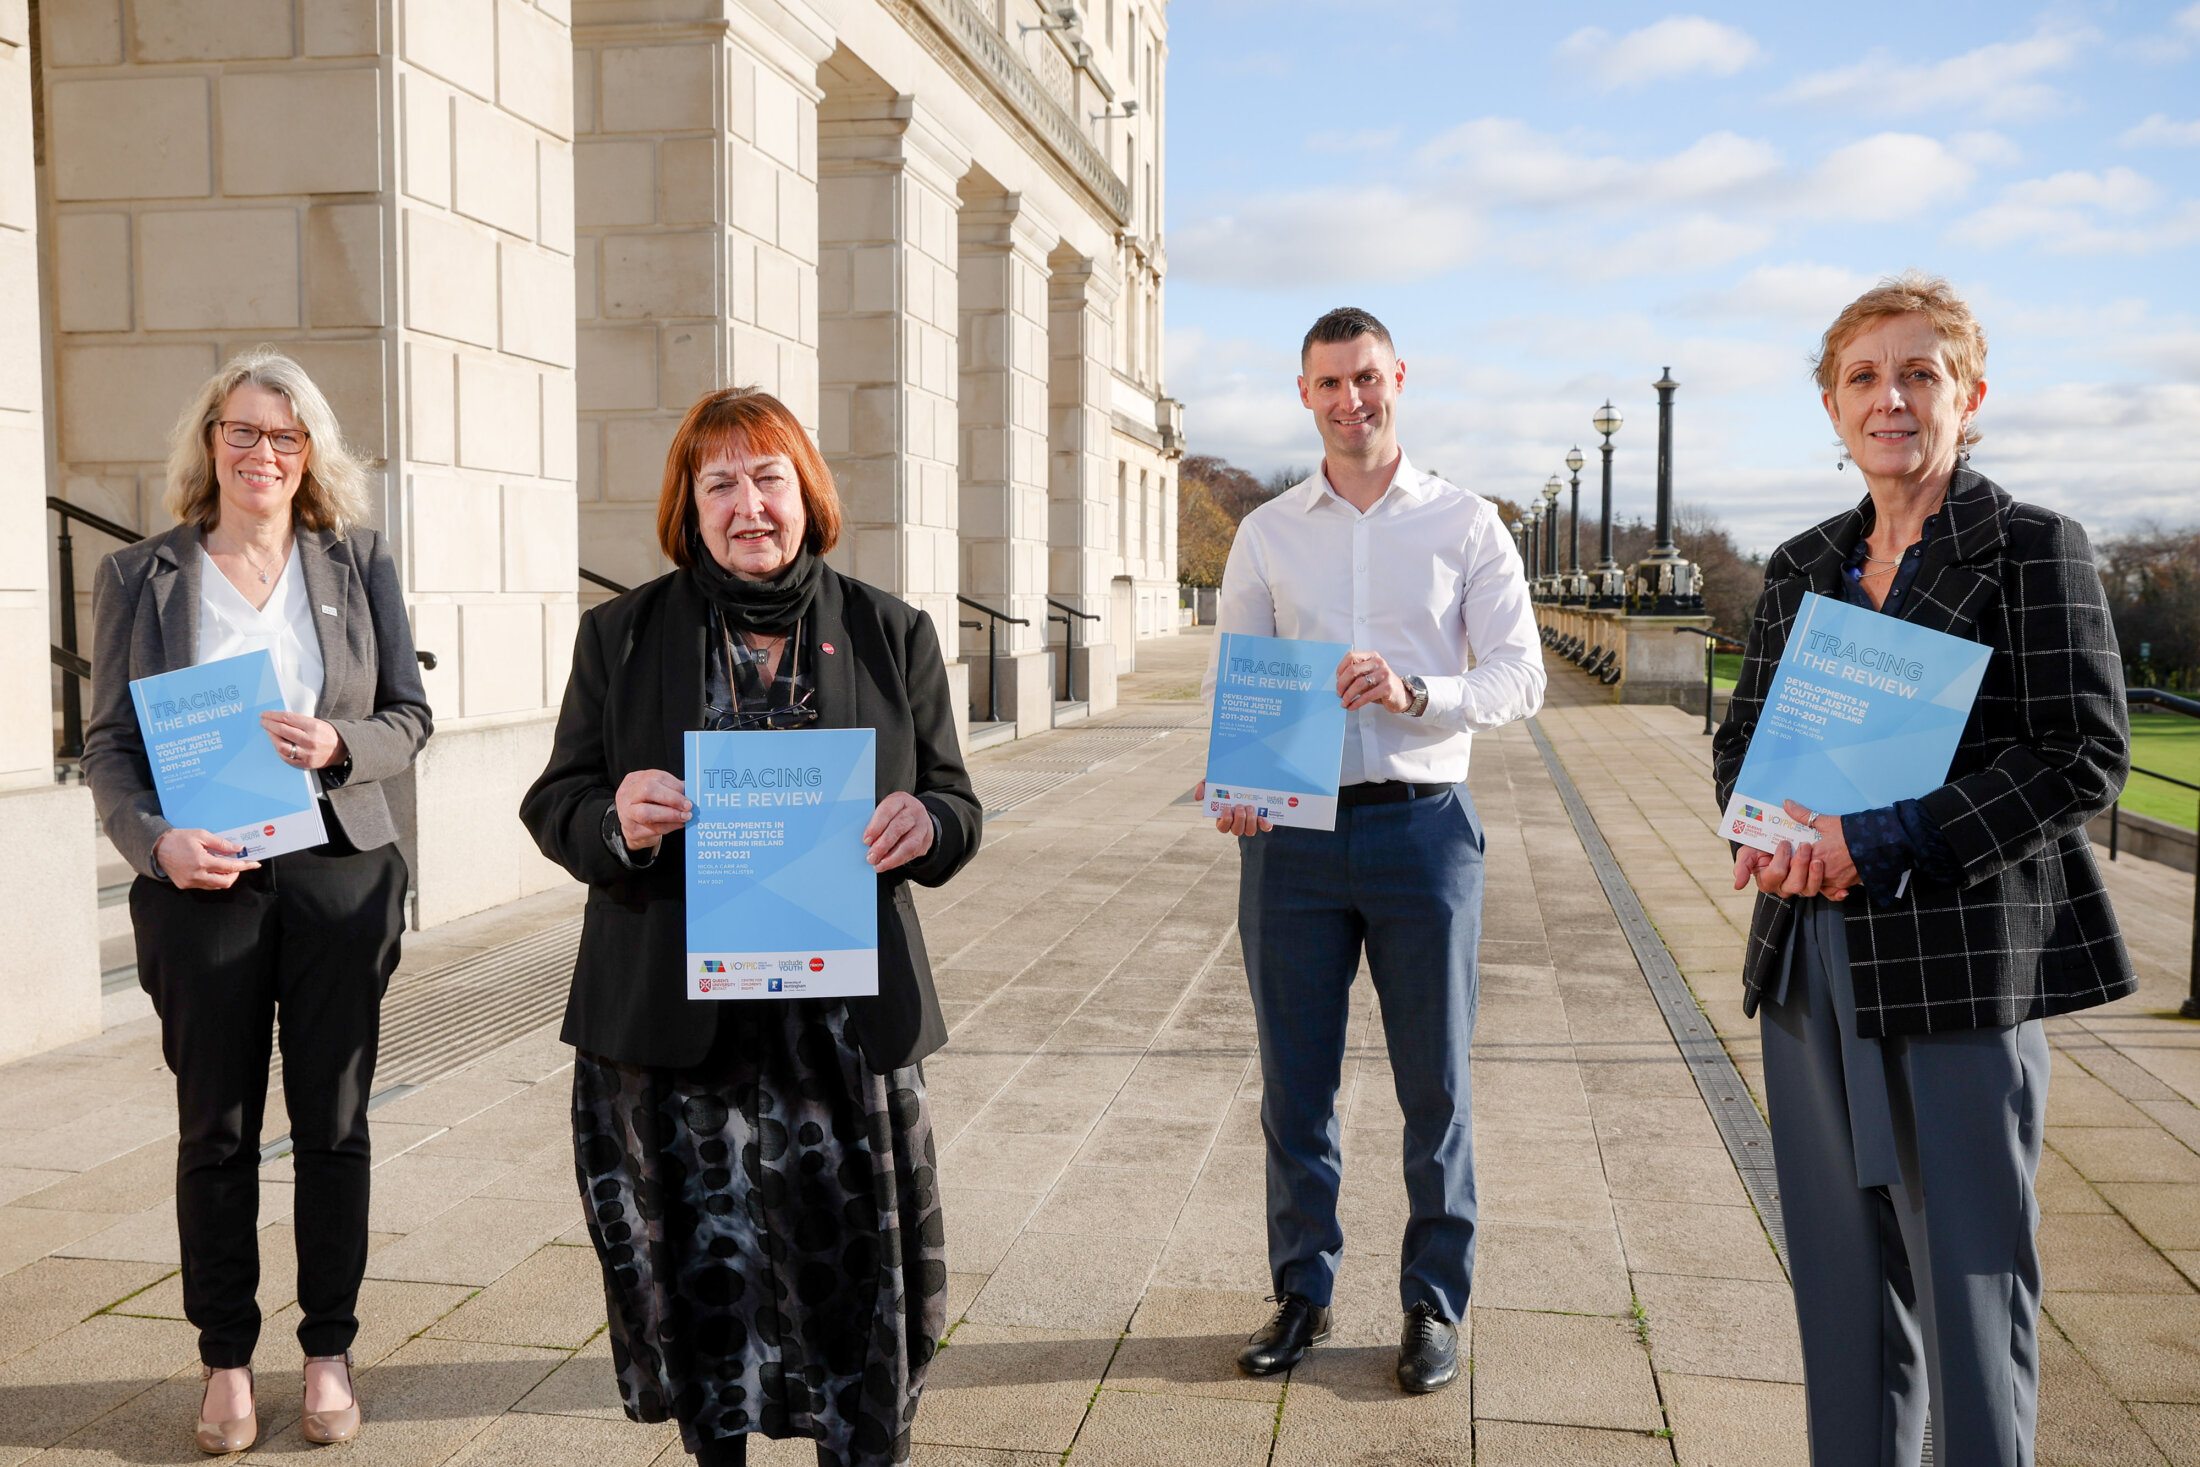 Left to right: Paula Rodgers (Include Youth), Olwen Lyner (NIACRO), Paul McCafferty (VOYPIC), Paddy Kelly (CLC)